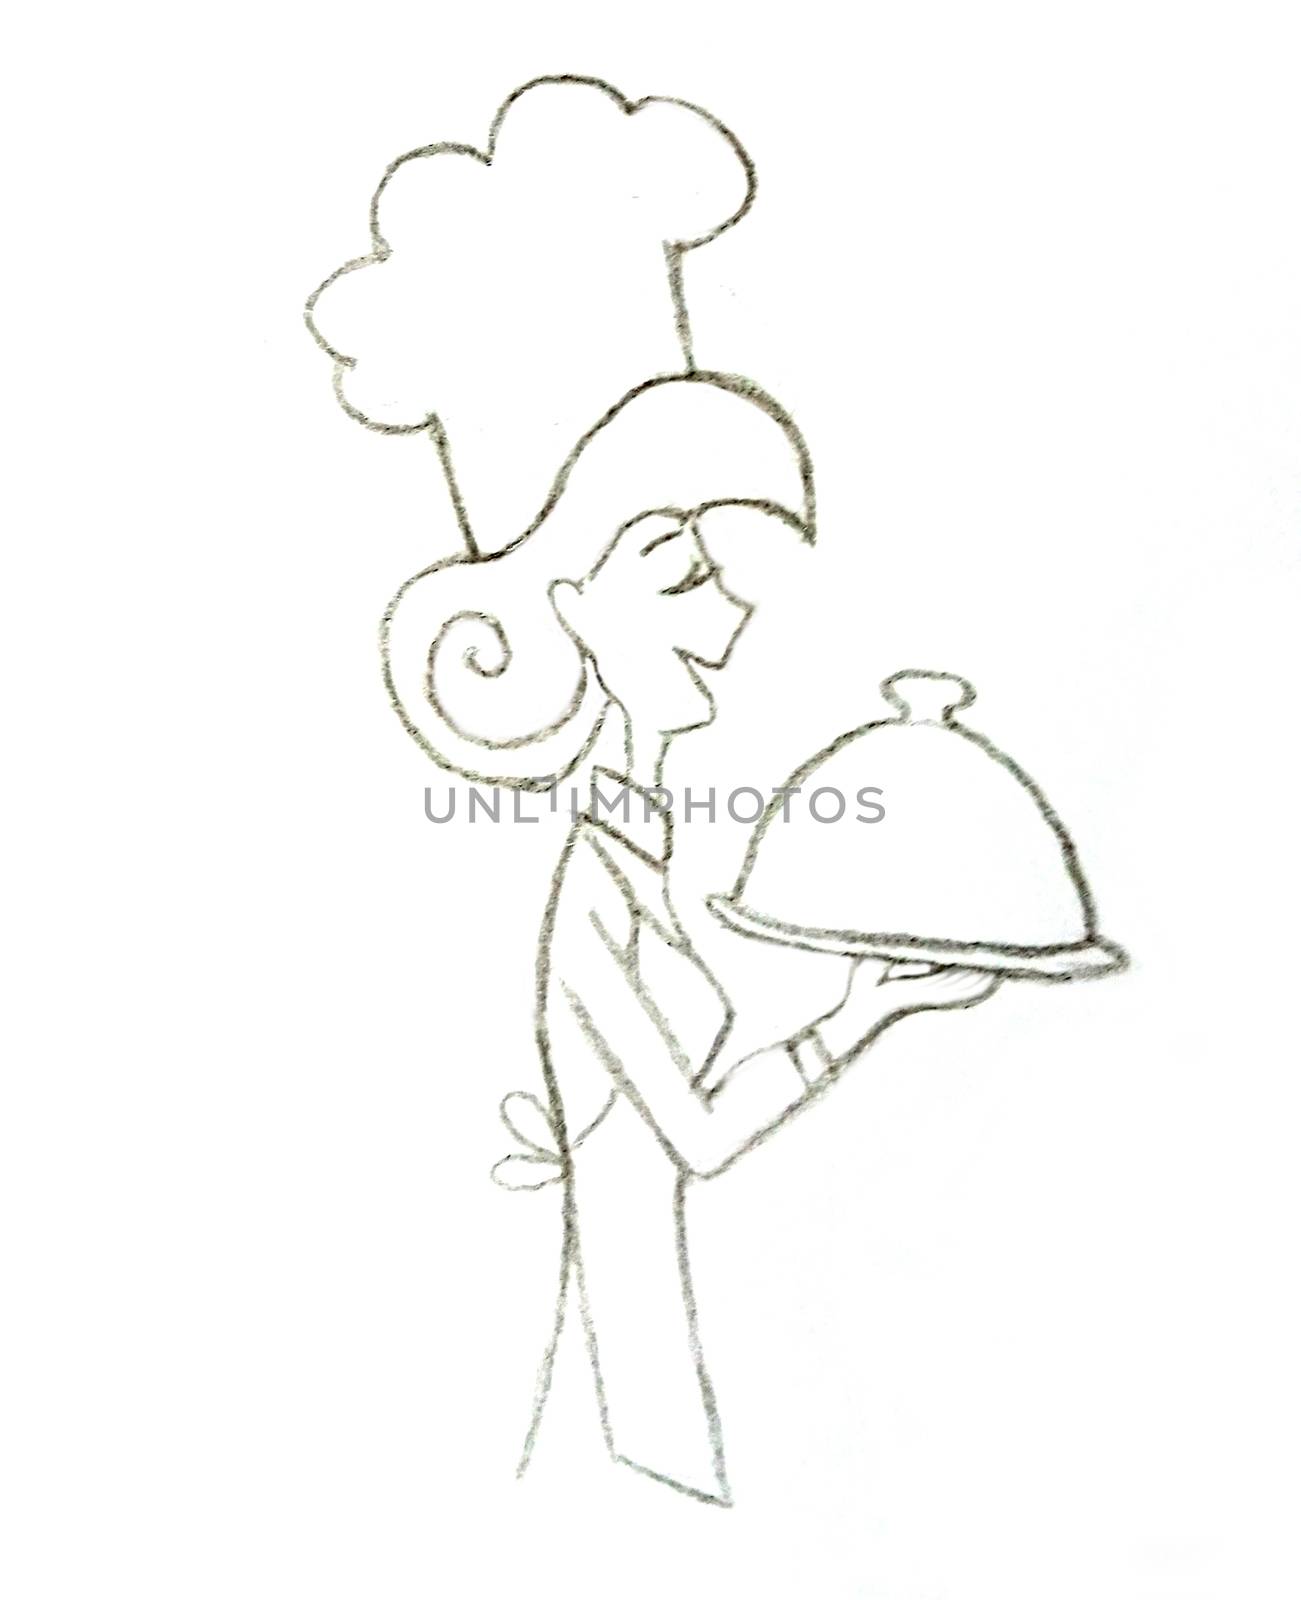 Cartoon Waitress Holding a Dish - isolated doodle illustration by JackyBrown